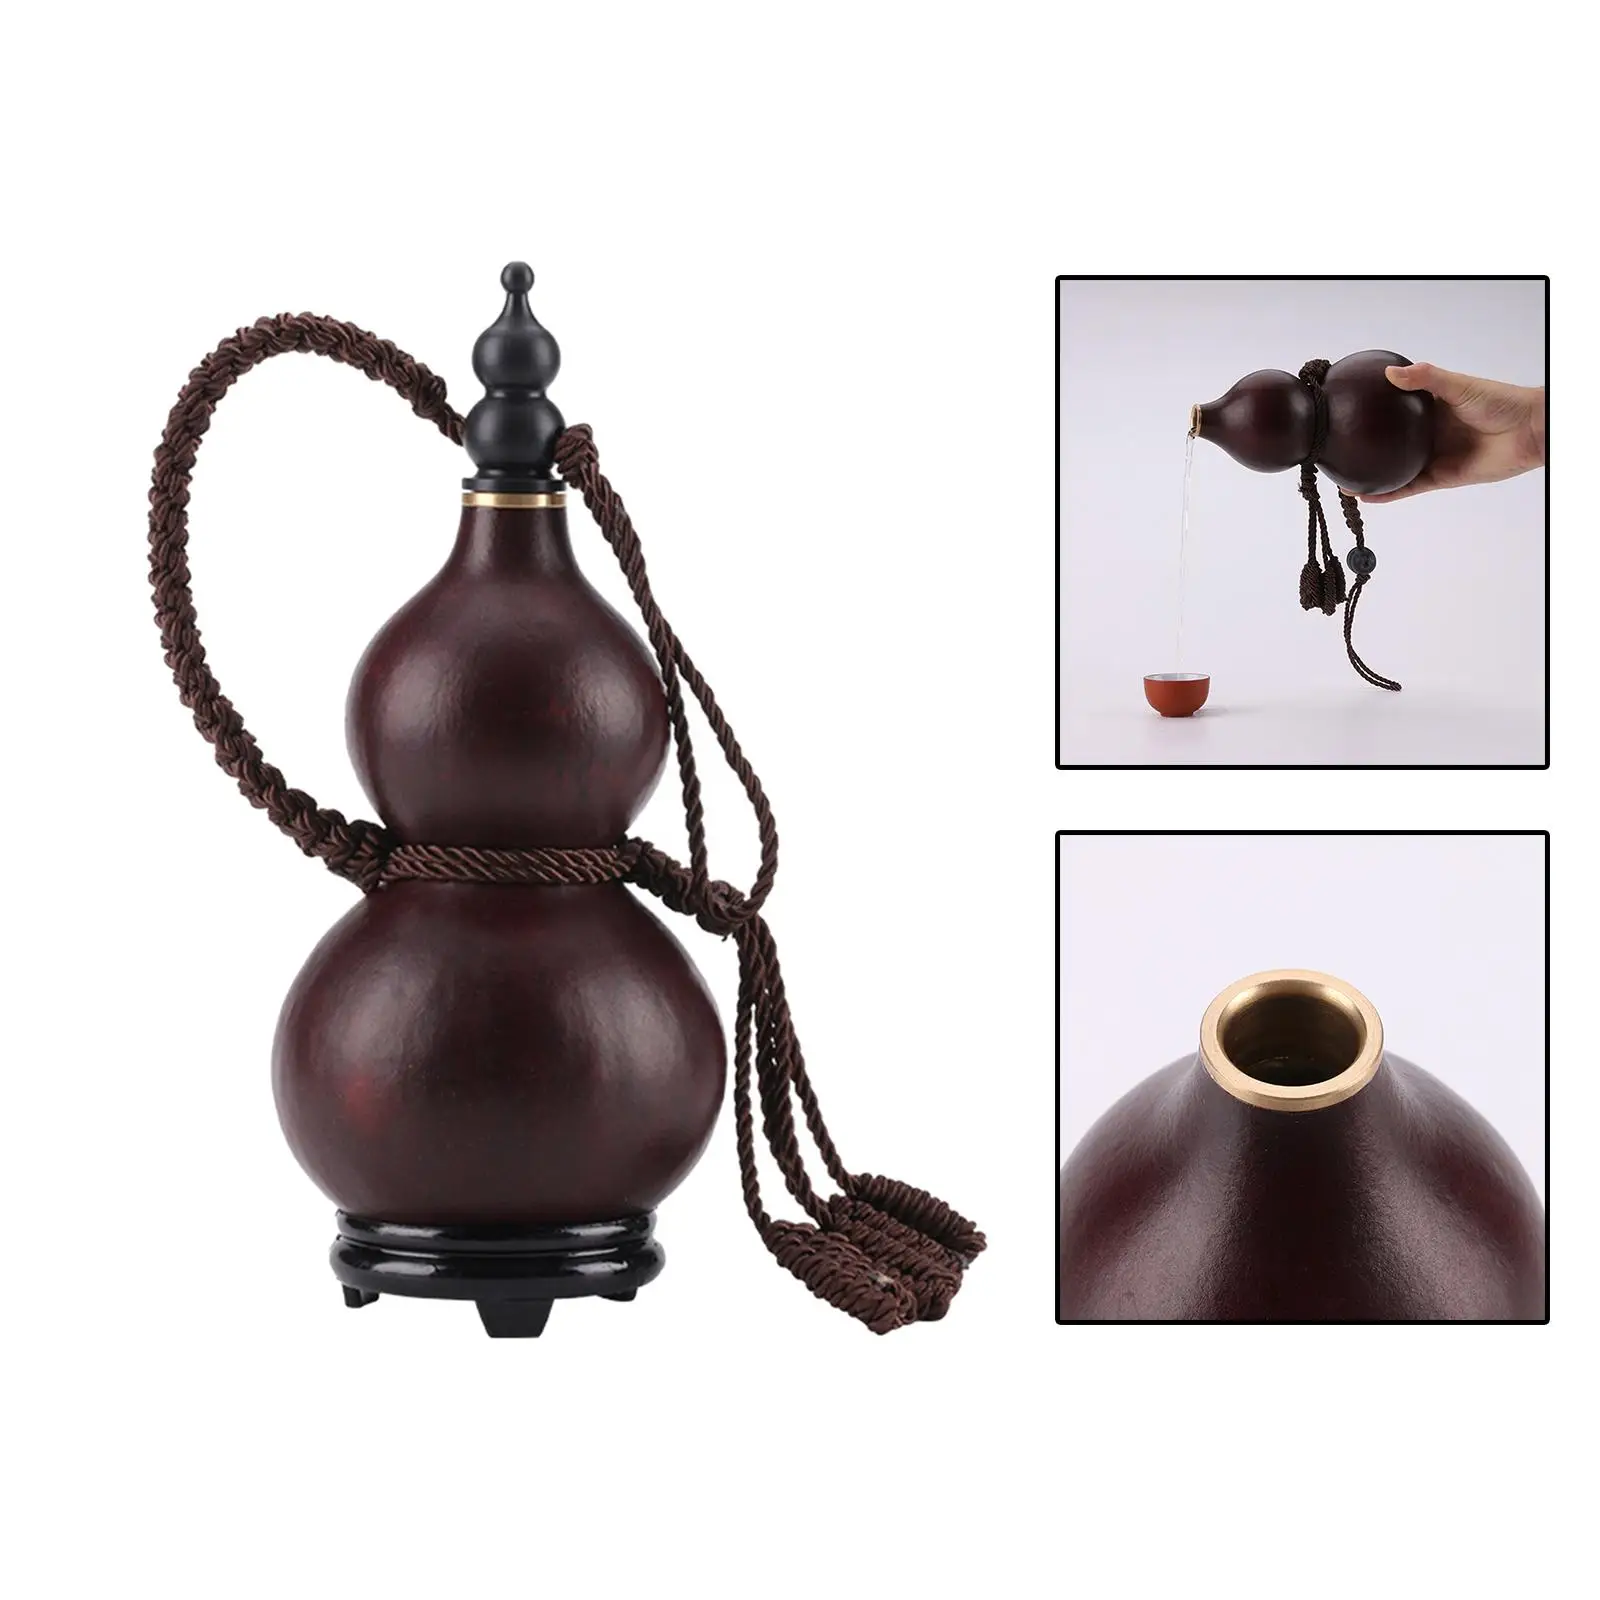 Portable Chinese Characteristic Carving Crafts Wine Gourd Decorative Water Bottle for Indoor Drinks Holder craft Decoration